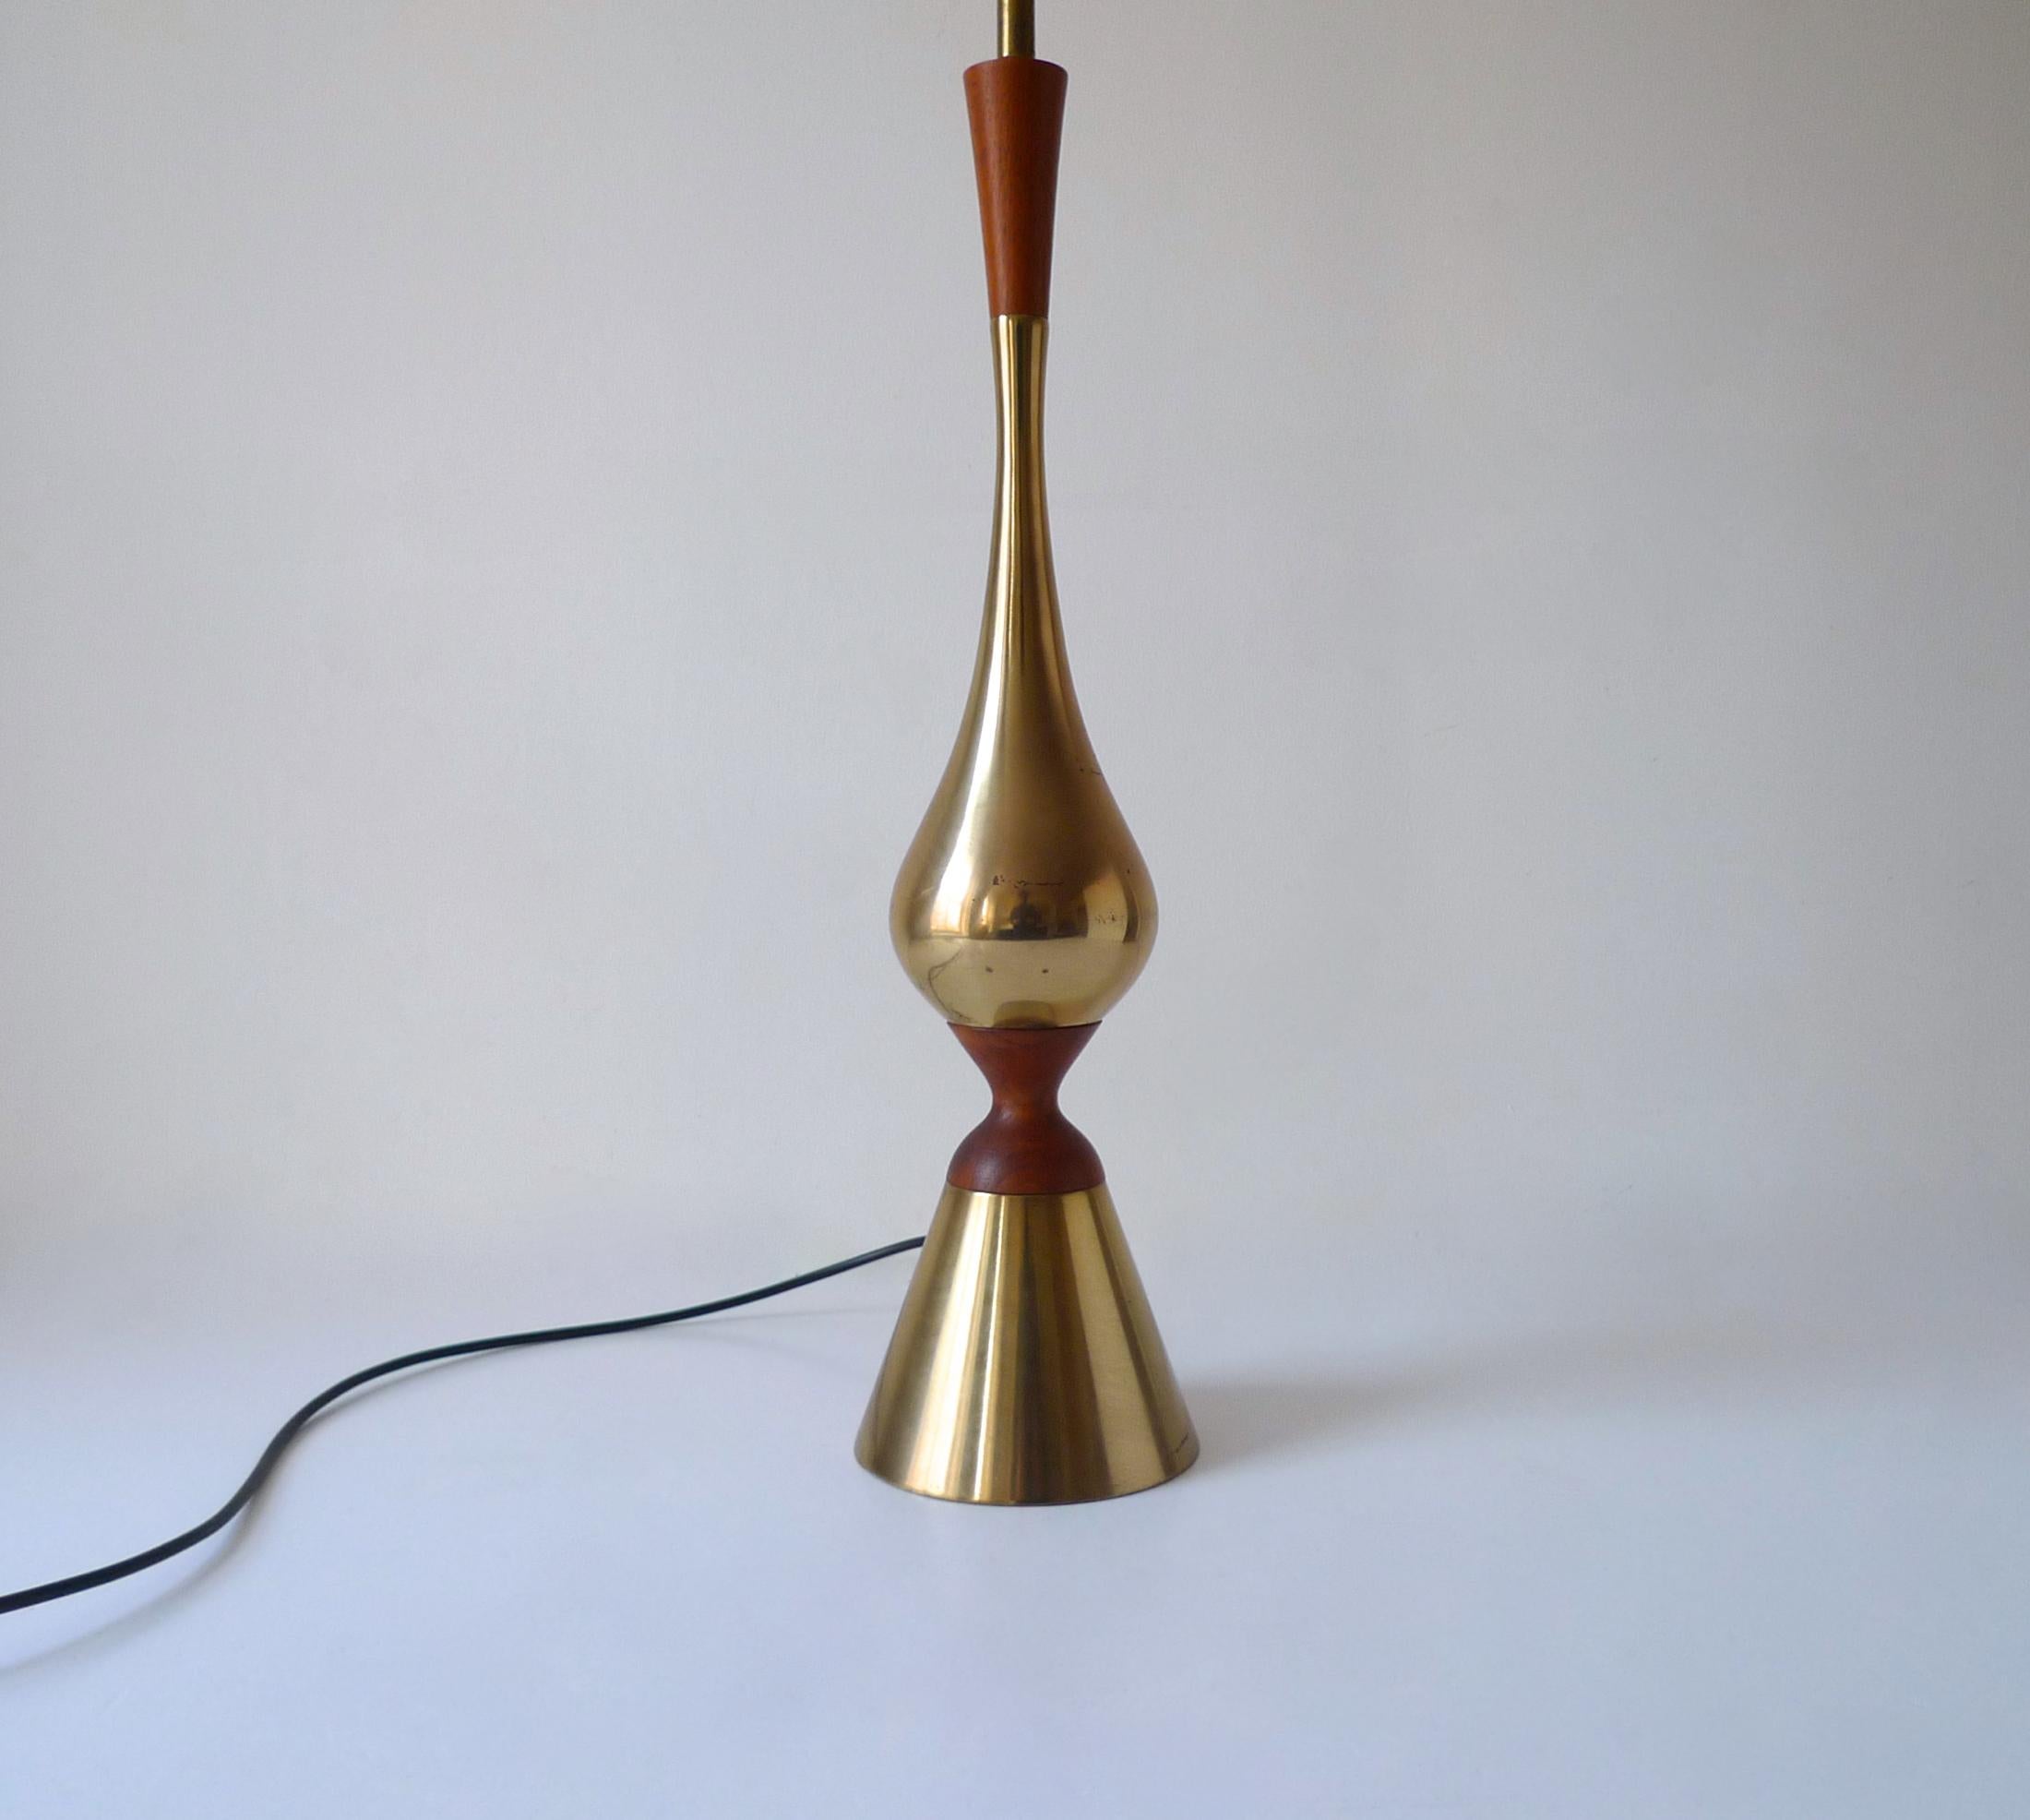 For sale a distinctive and elegant Mid-Century Modernist brass & walnut table lamp designed by Tony Paul for Westwood Industries Inc., USA circa 1950s.

American industrial designer Tony Paul was born in the Bronx, NY on February 28, 1918. Paul